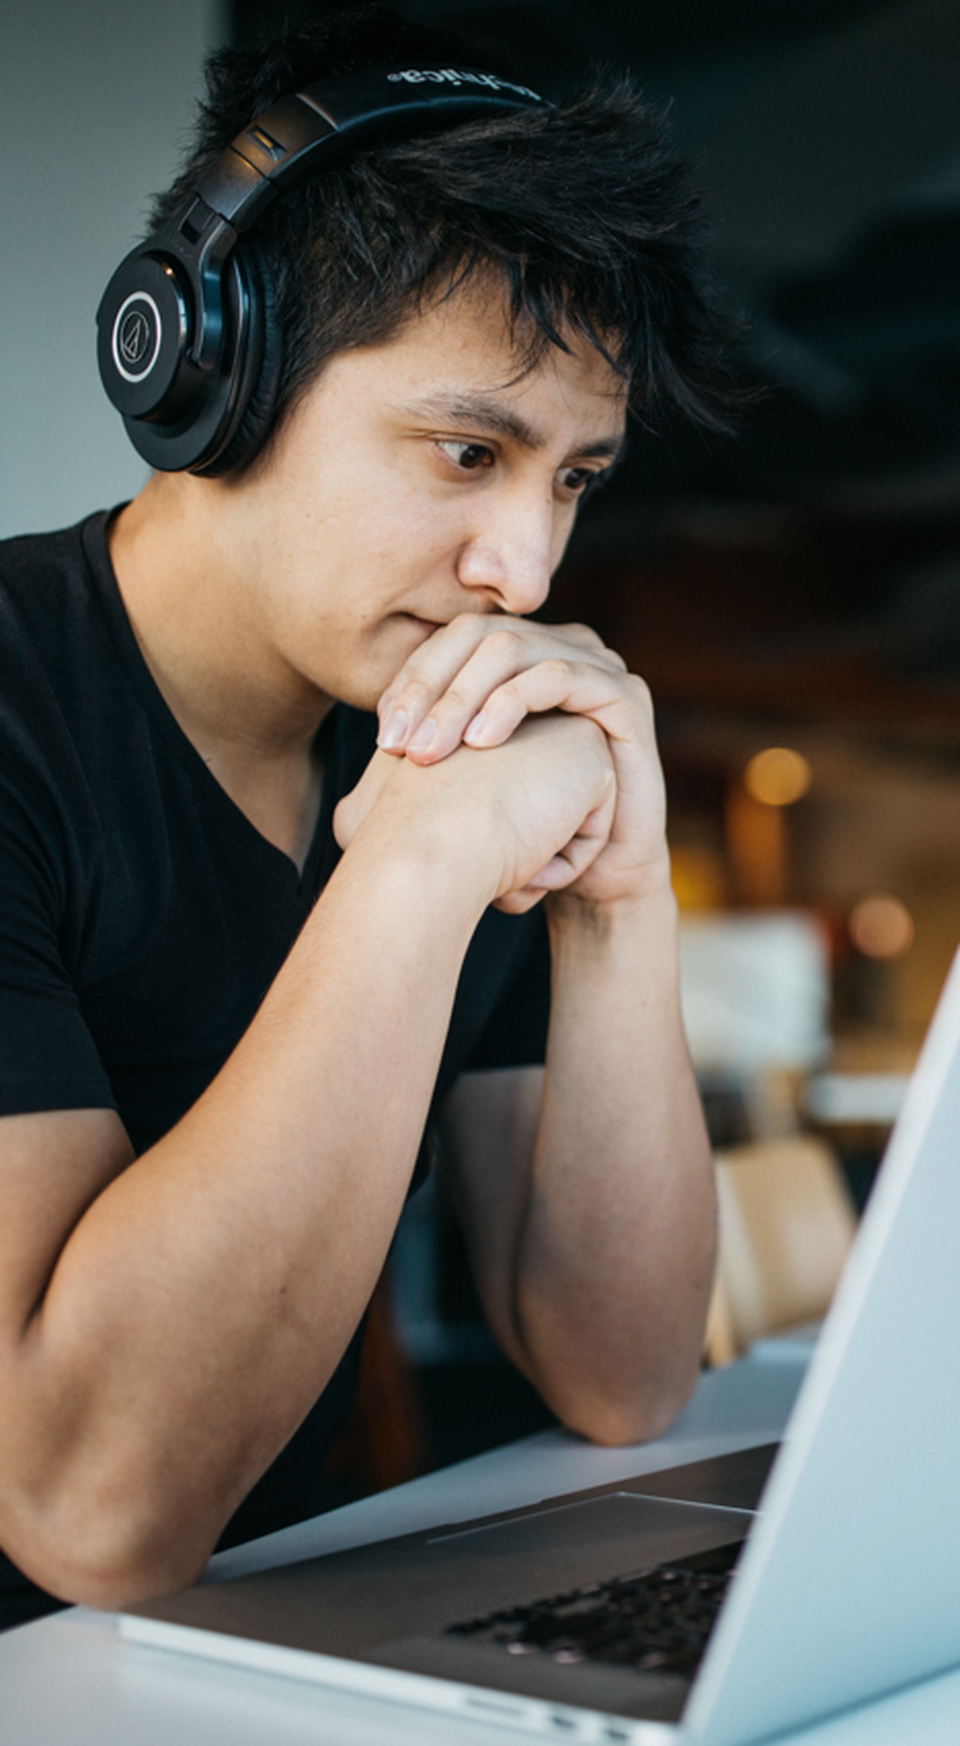 A men with headphones looking worried to the laptop screen